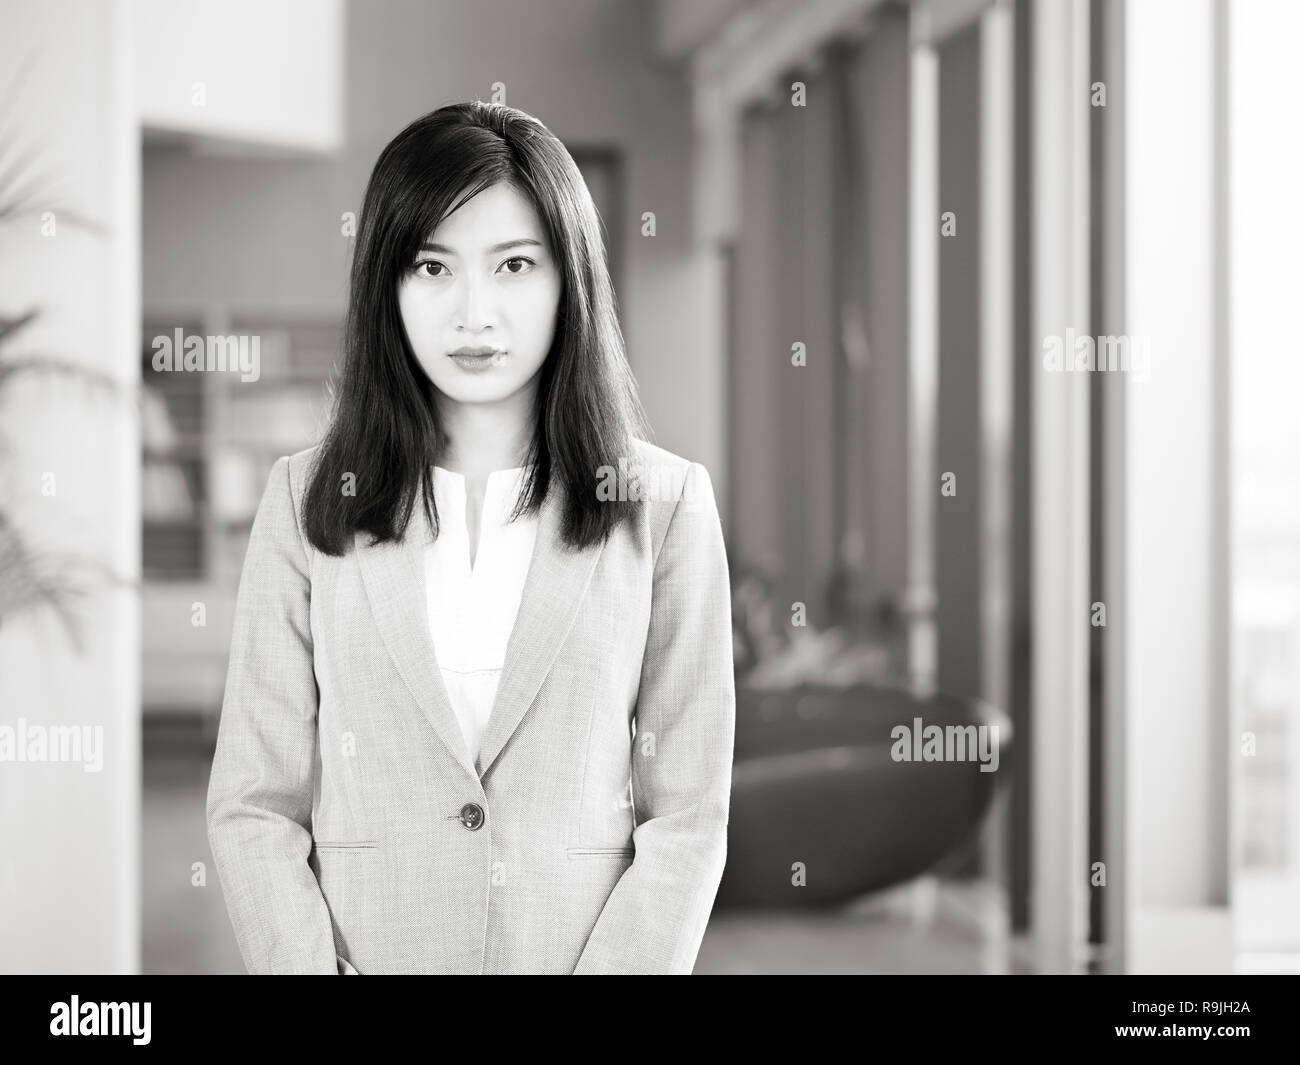 office portrait of a young asian business woman looking at camera, black and white. Stock Photo